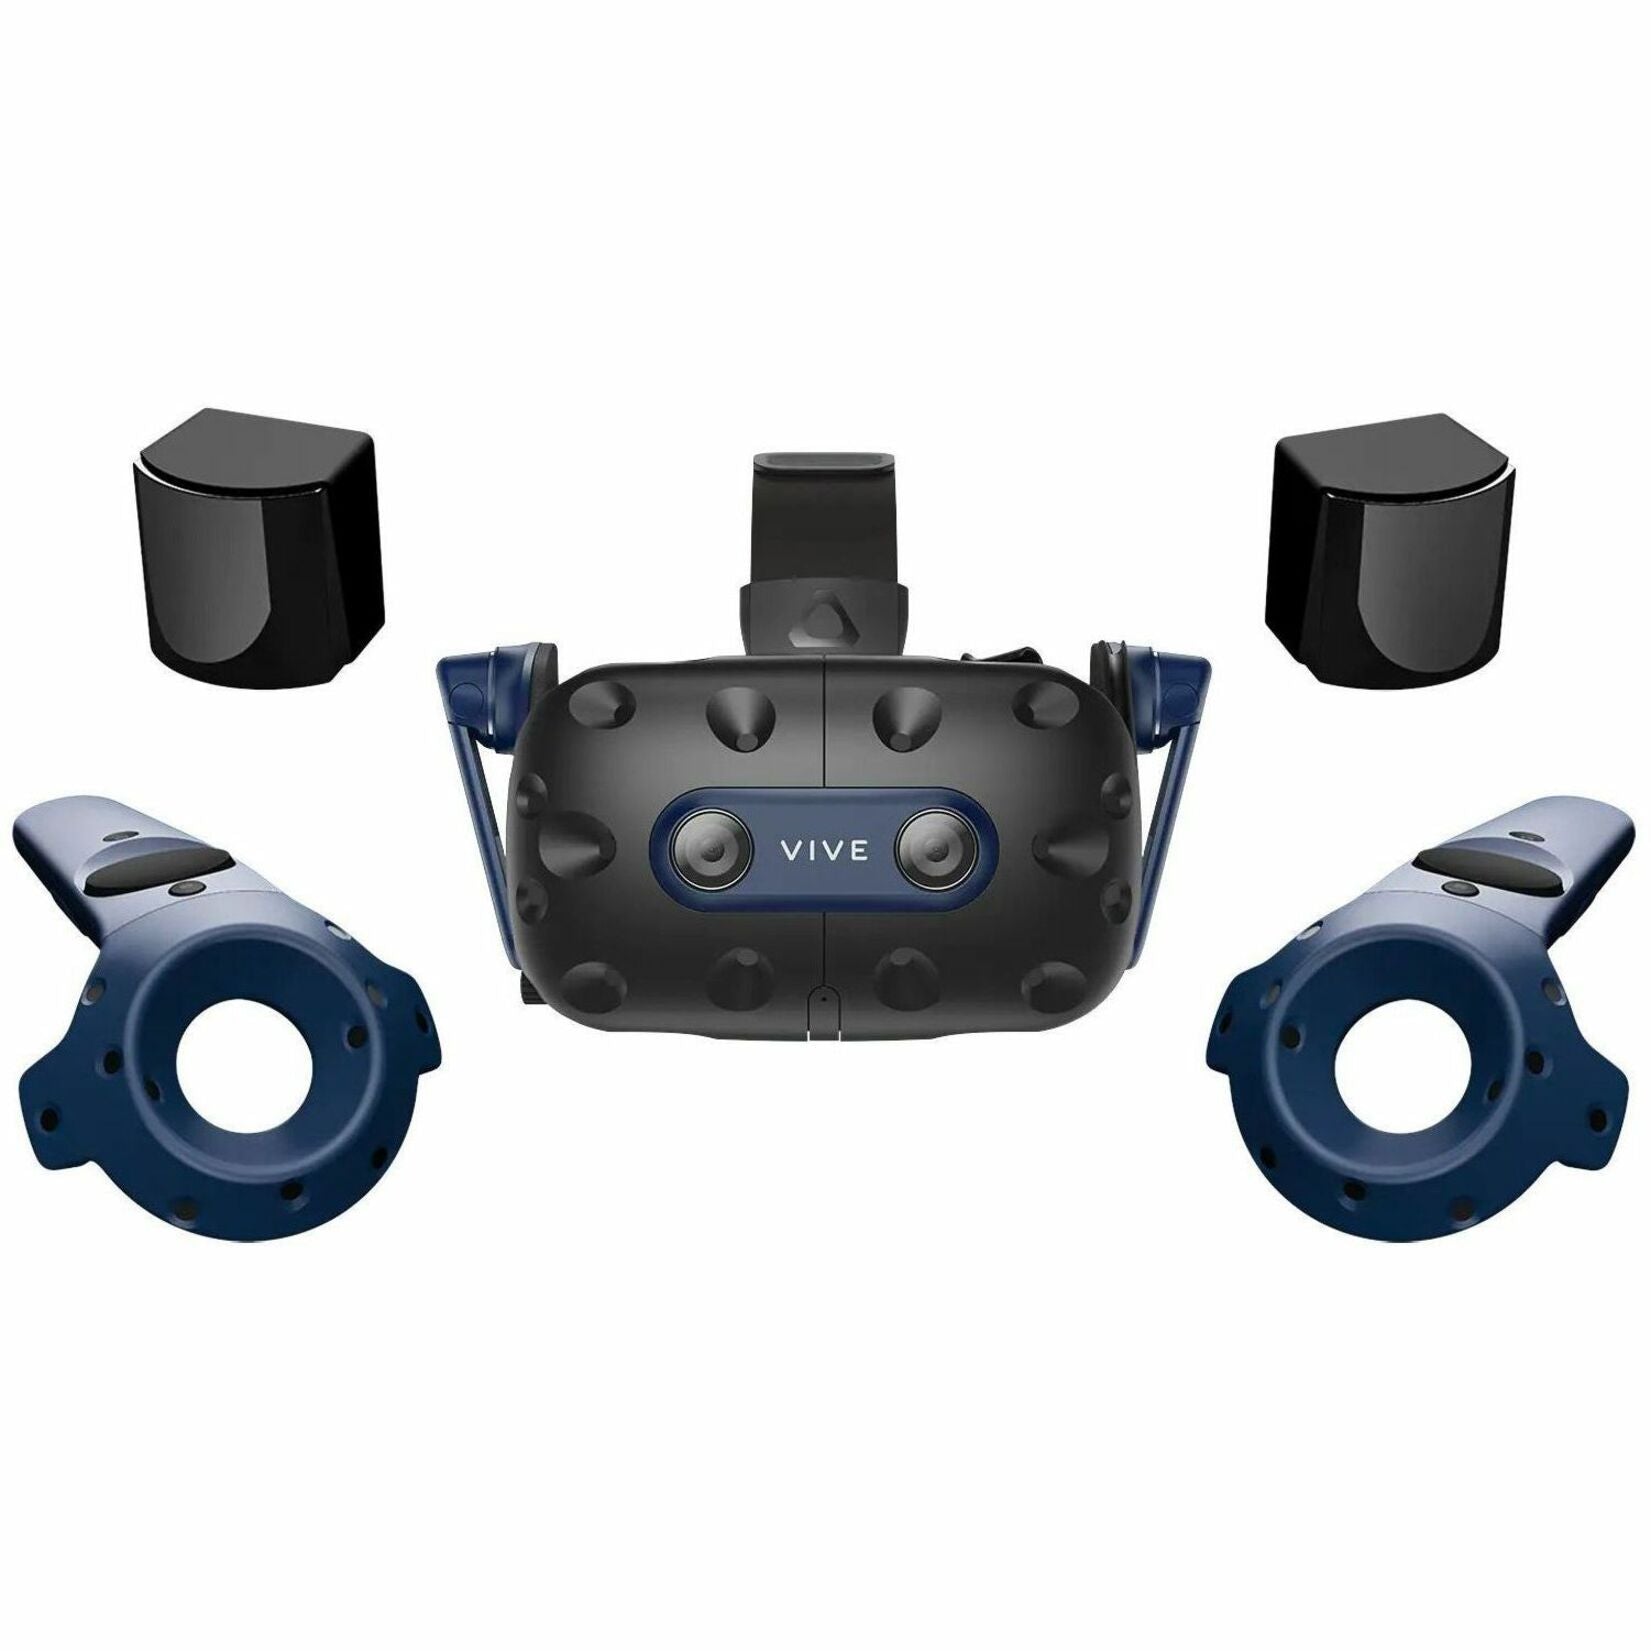 VIVE 99HASZ011-00 Pro 2 Full Kit, Virtual Reality Headset with Adjustable Interpupillary Distance (IPD) and 120° Field of View